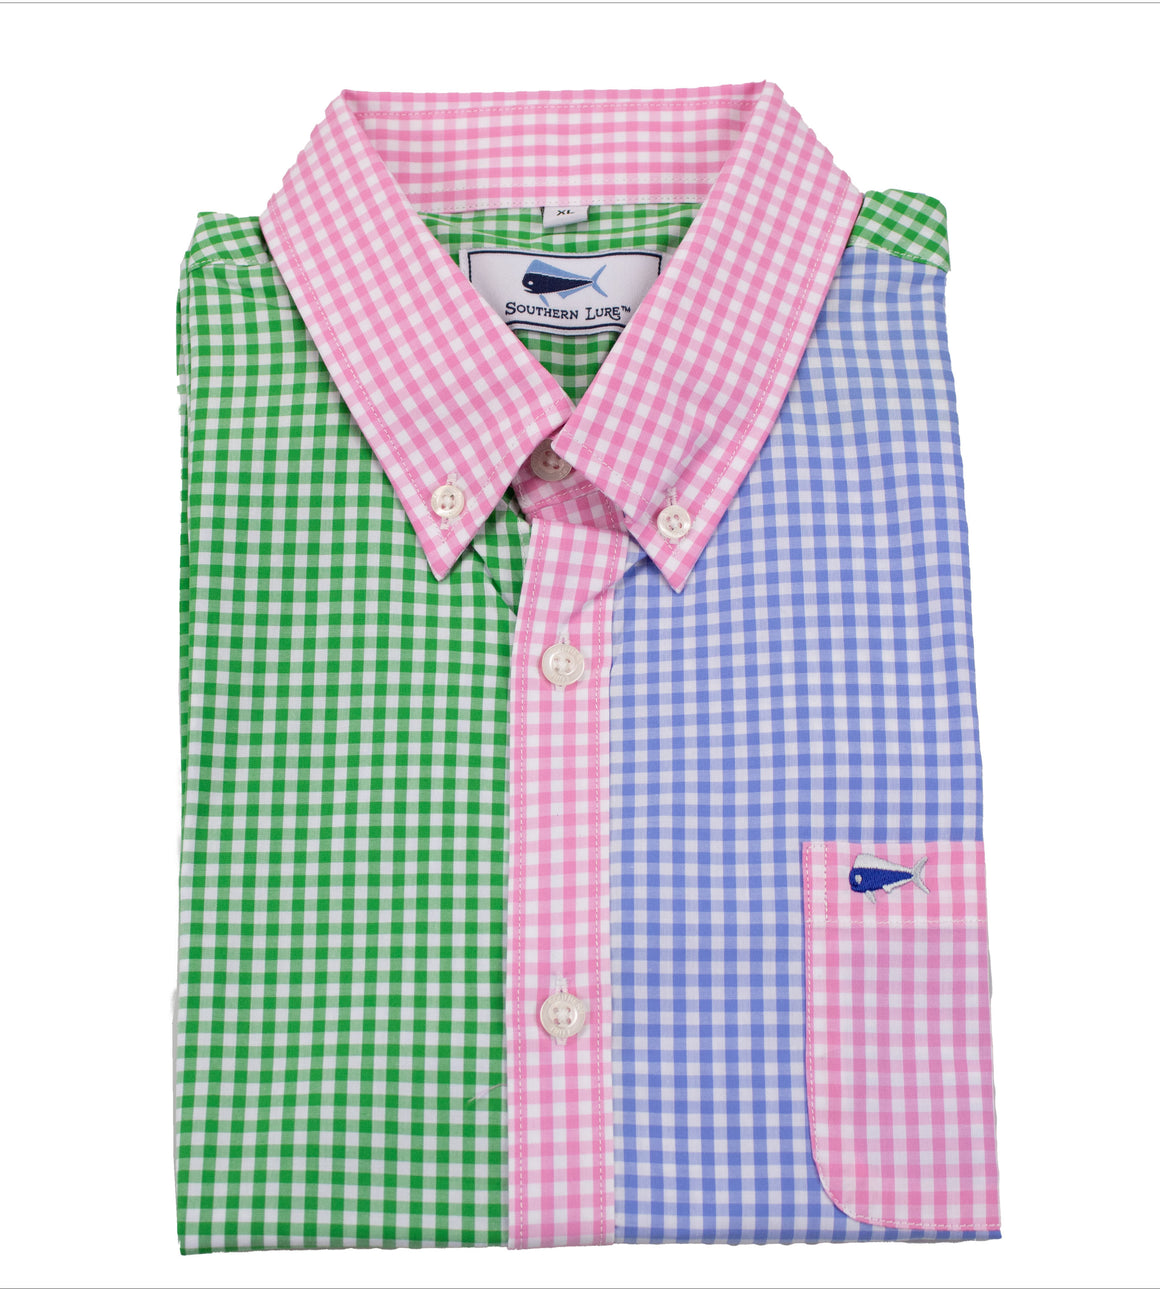 Youth & Toddler Short Sleeve Woven Sport Shirt - Fun Times Gingham